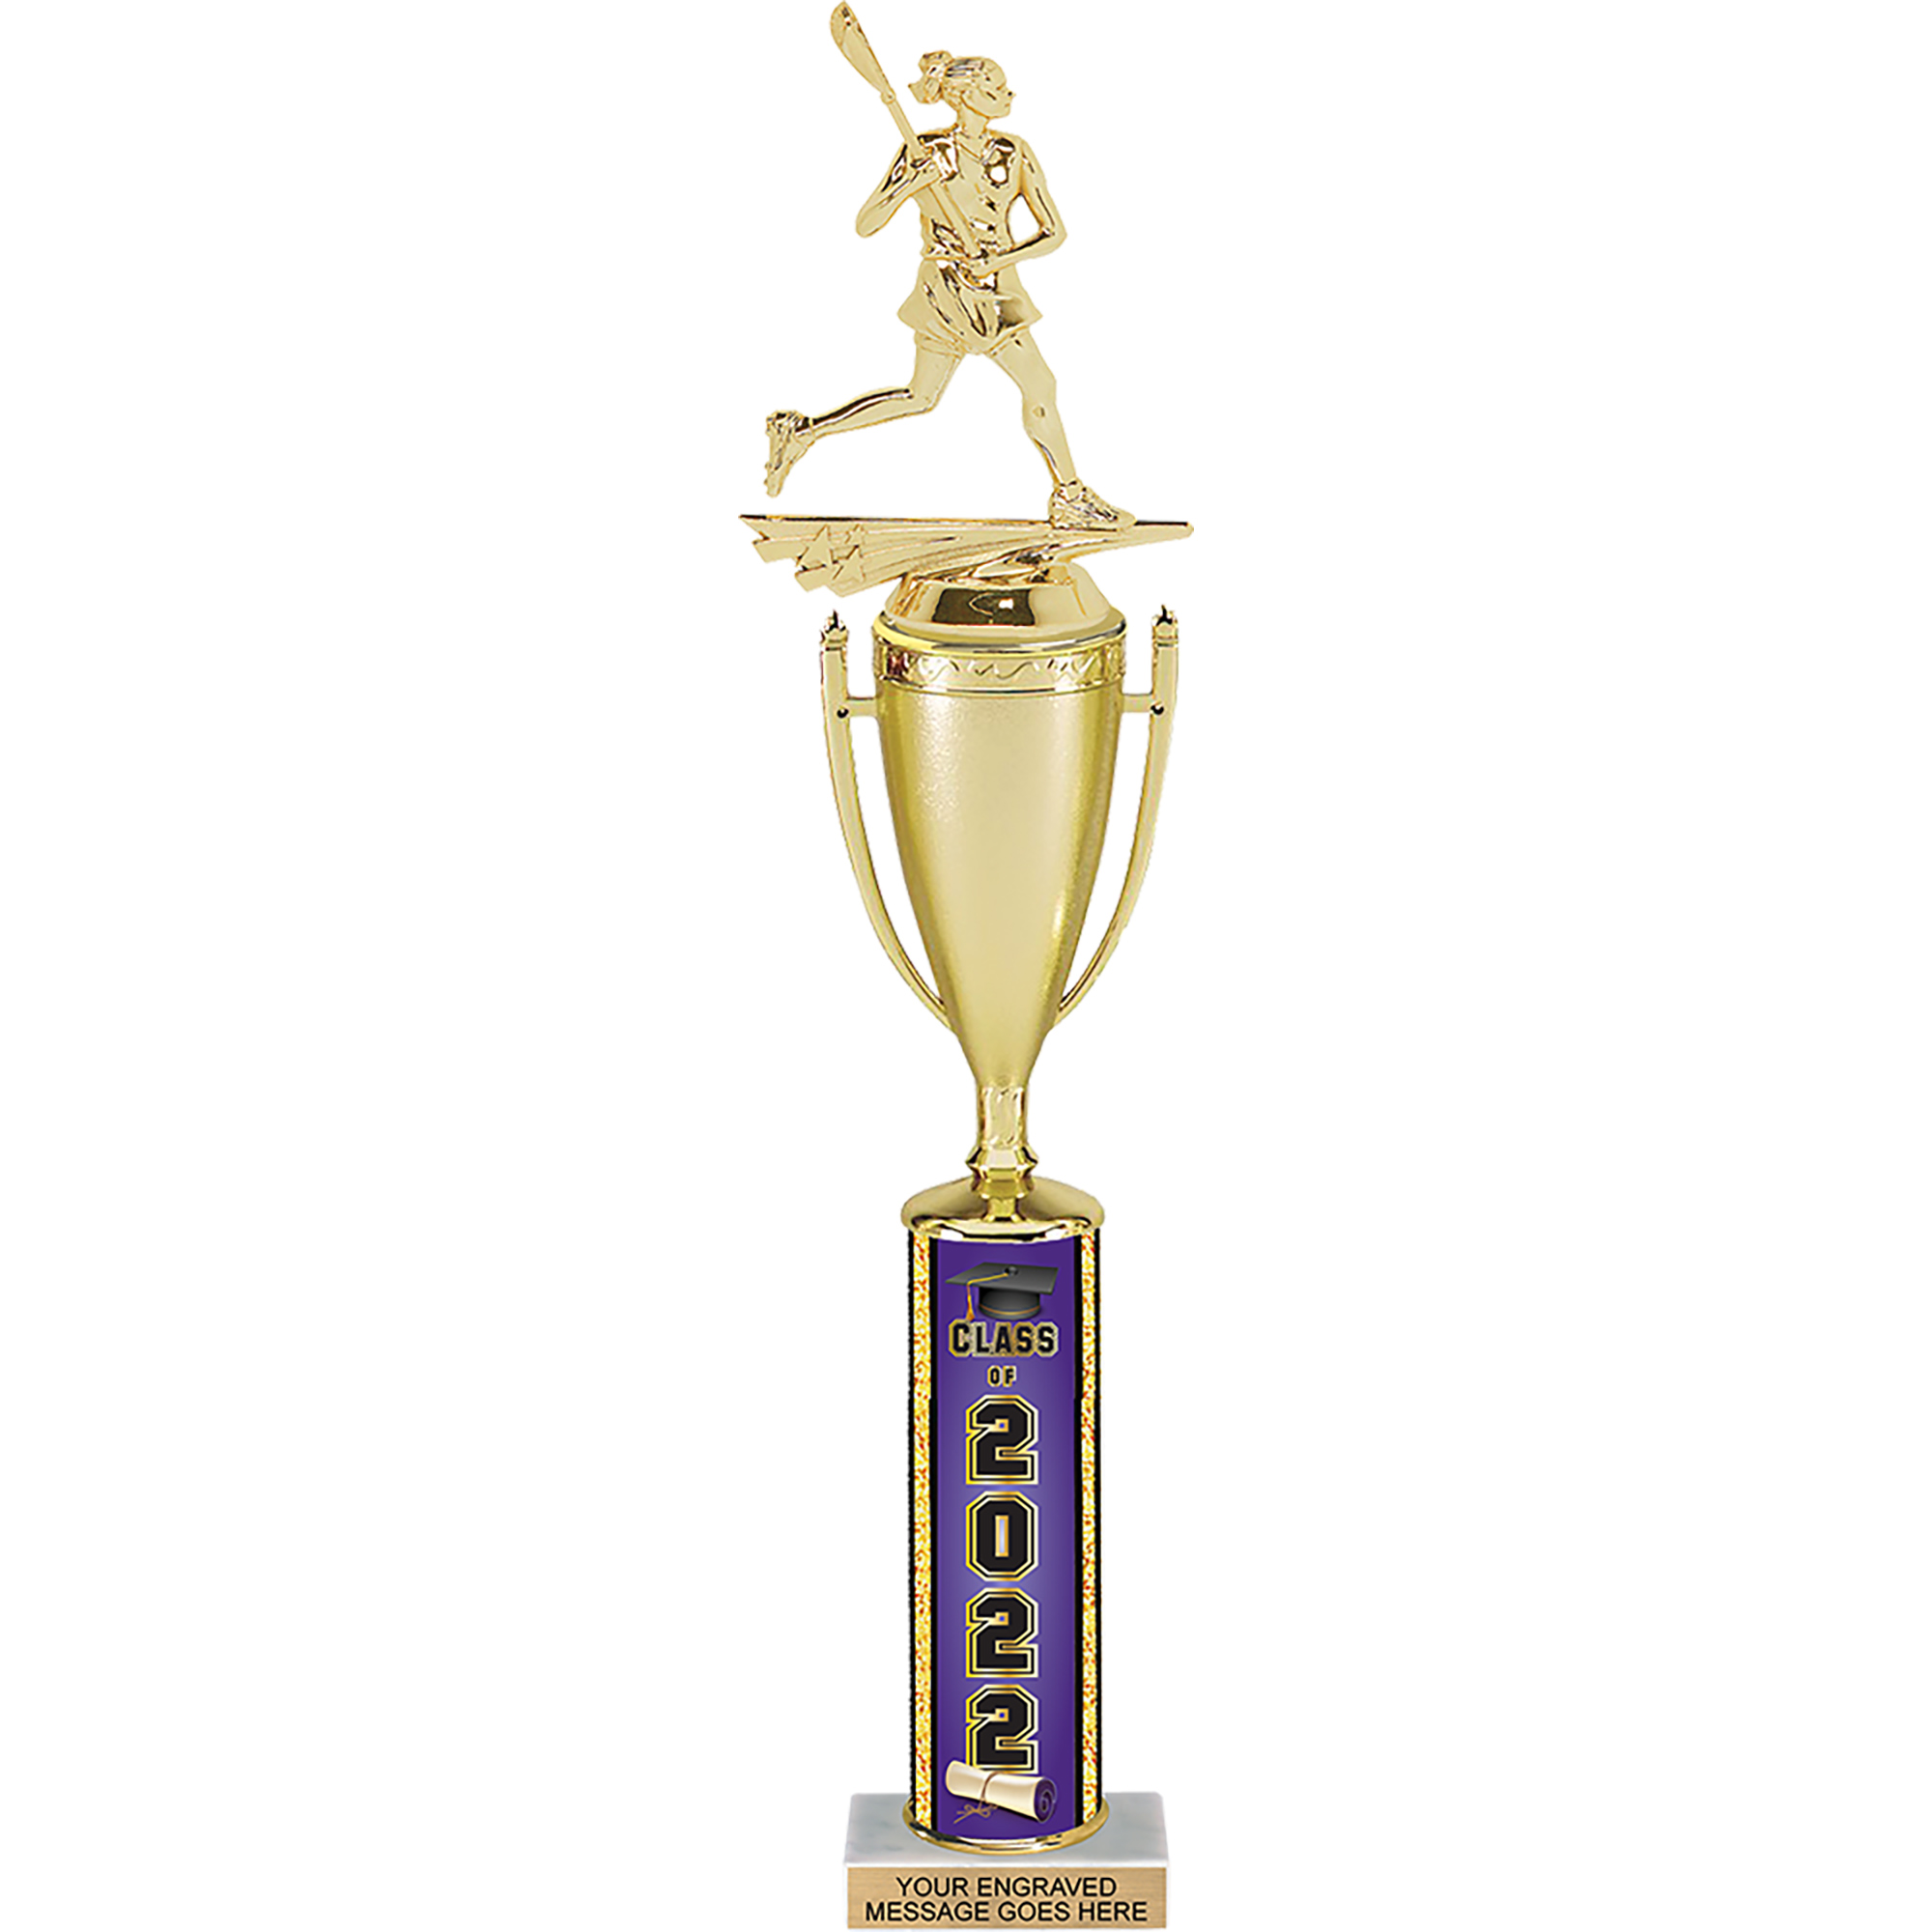 Class of 2022 17 inch Column Cup Trophy